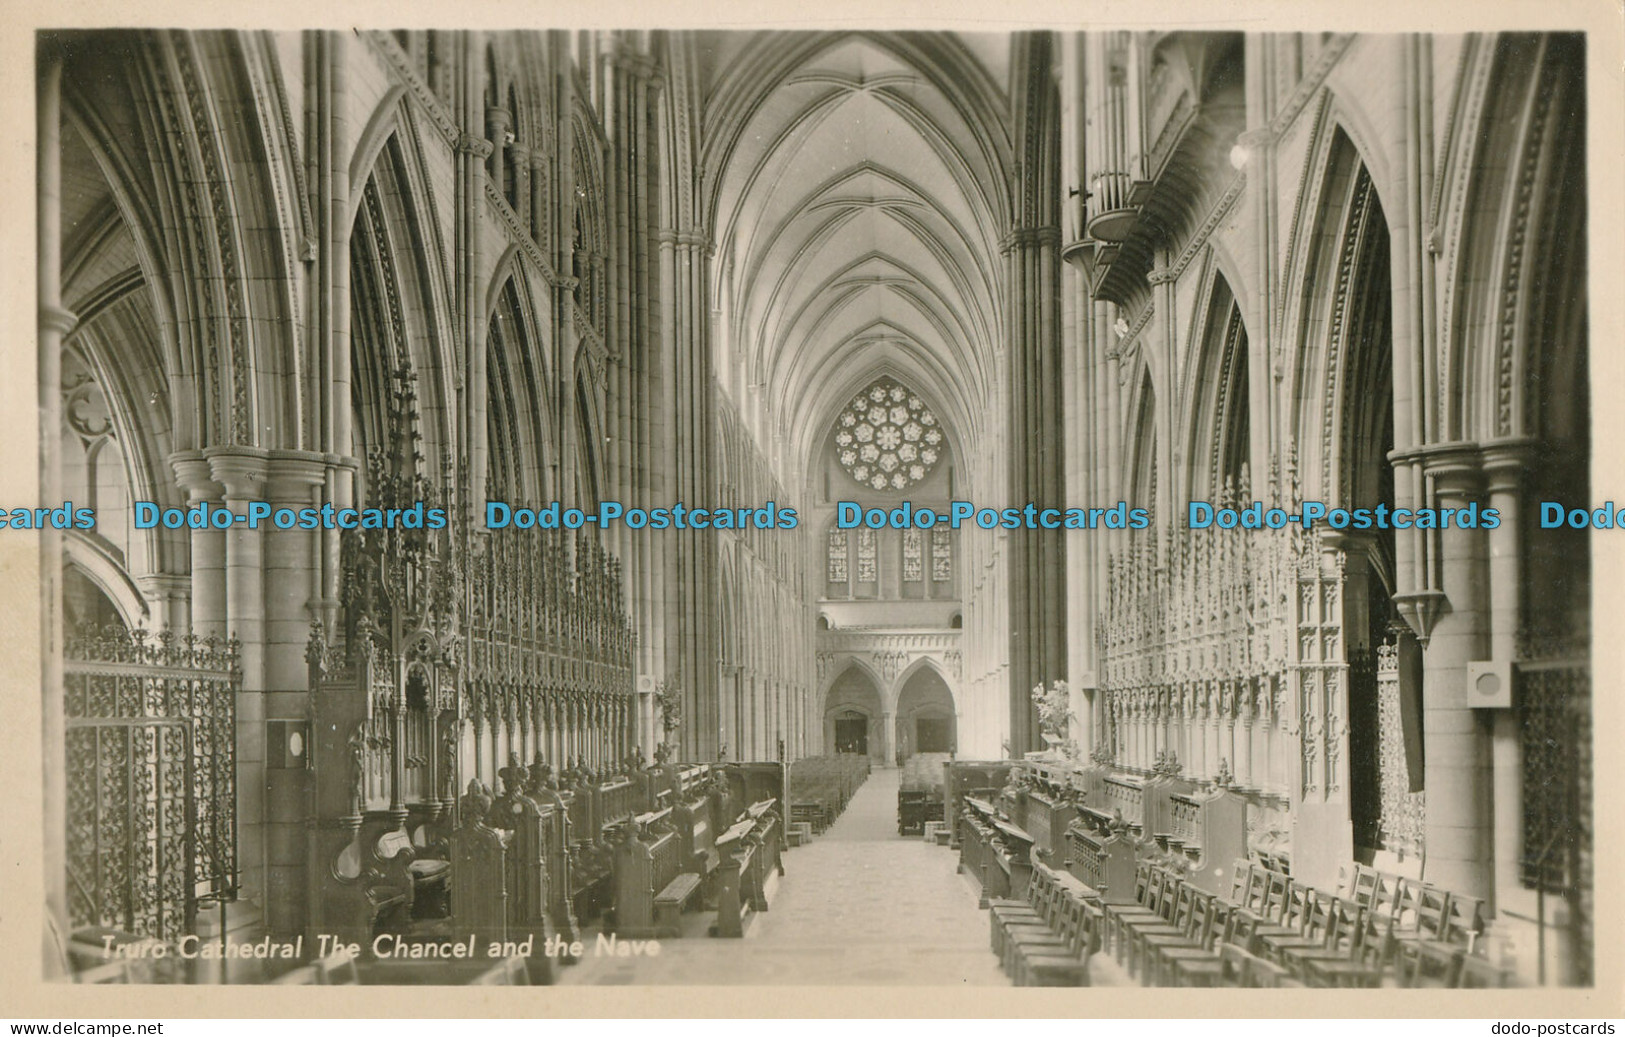 R006253 Truro Cathedral. The Chancel And The Nave. Frank Grattan. Penpol. RP - World